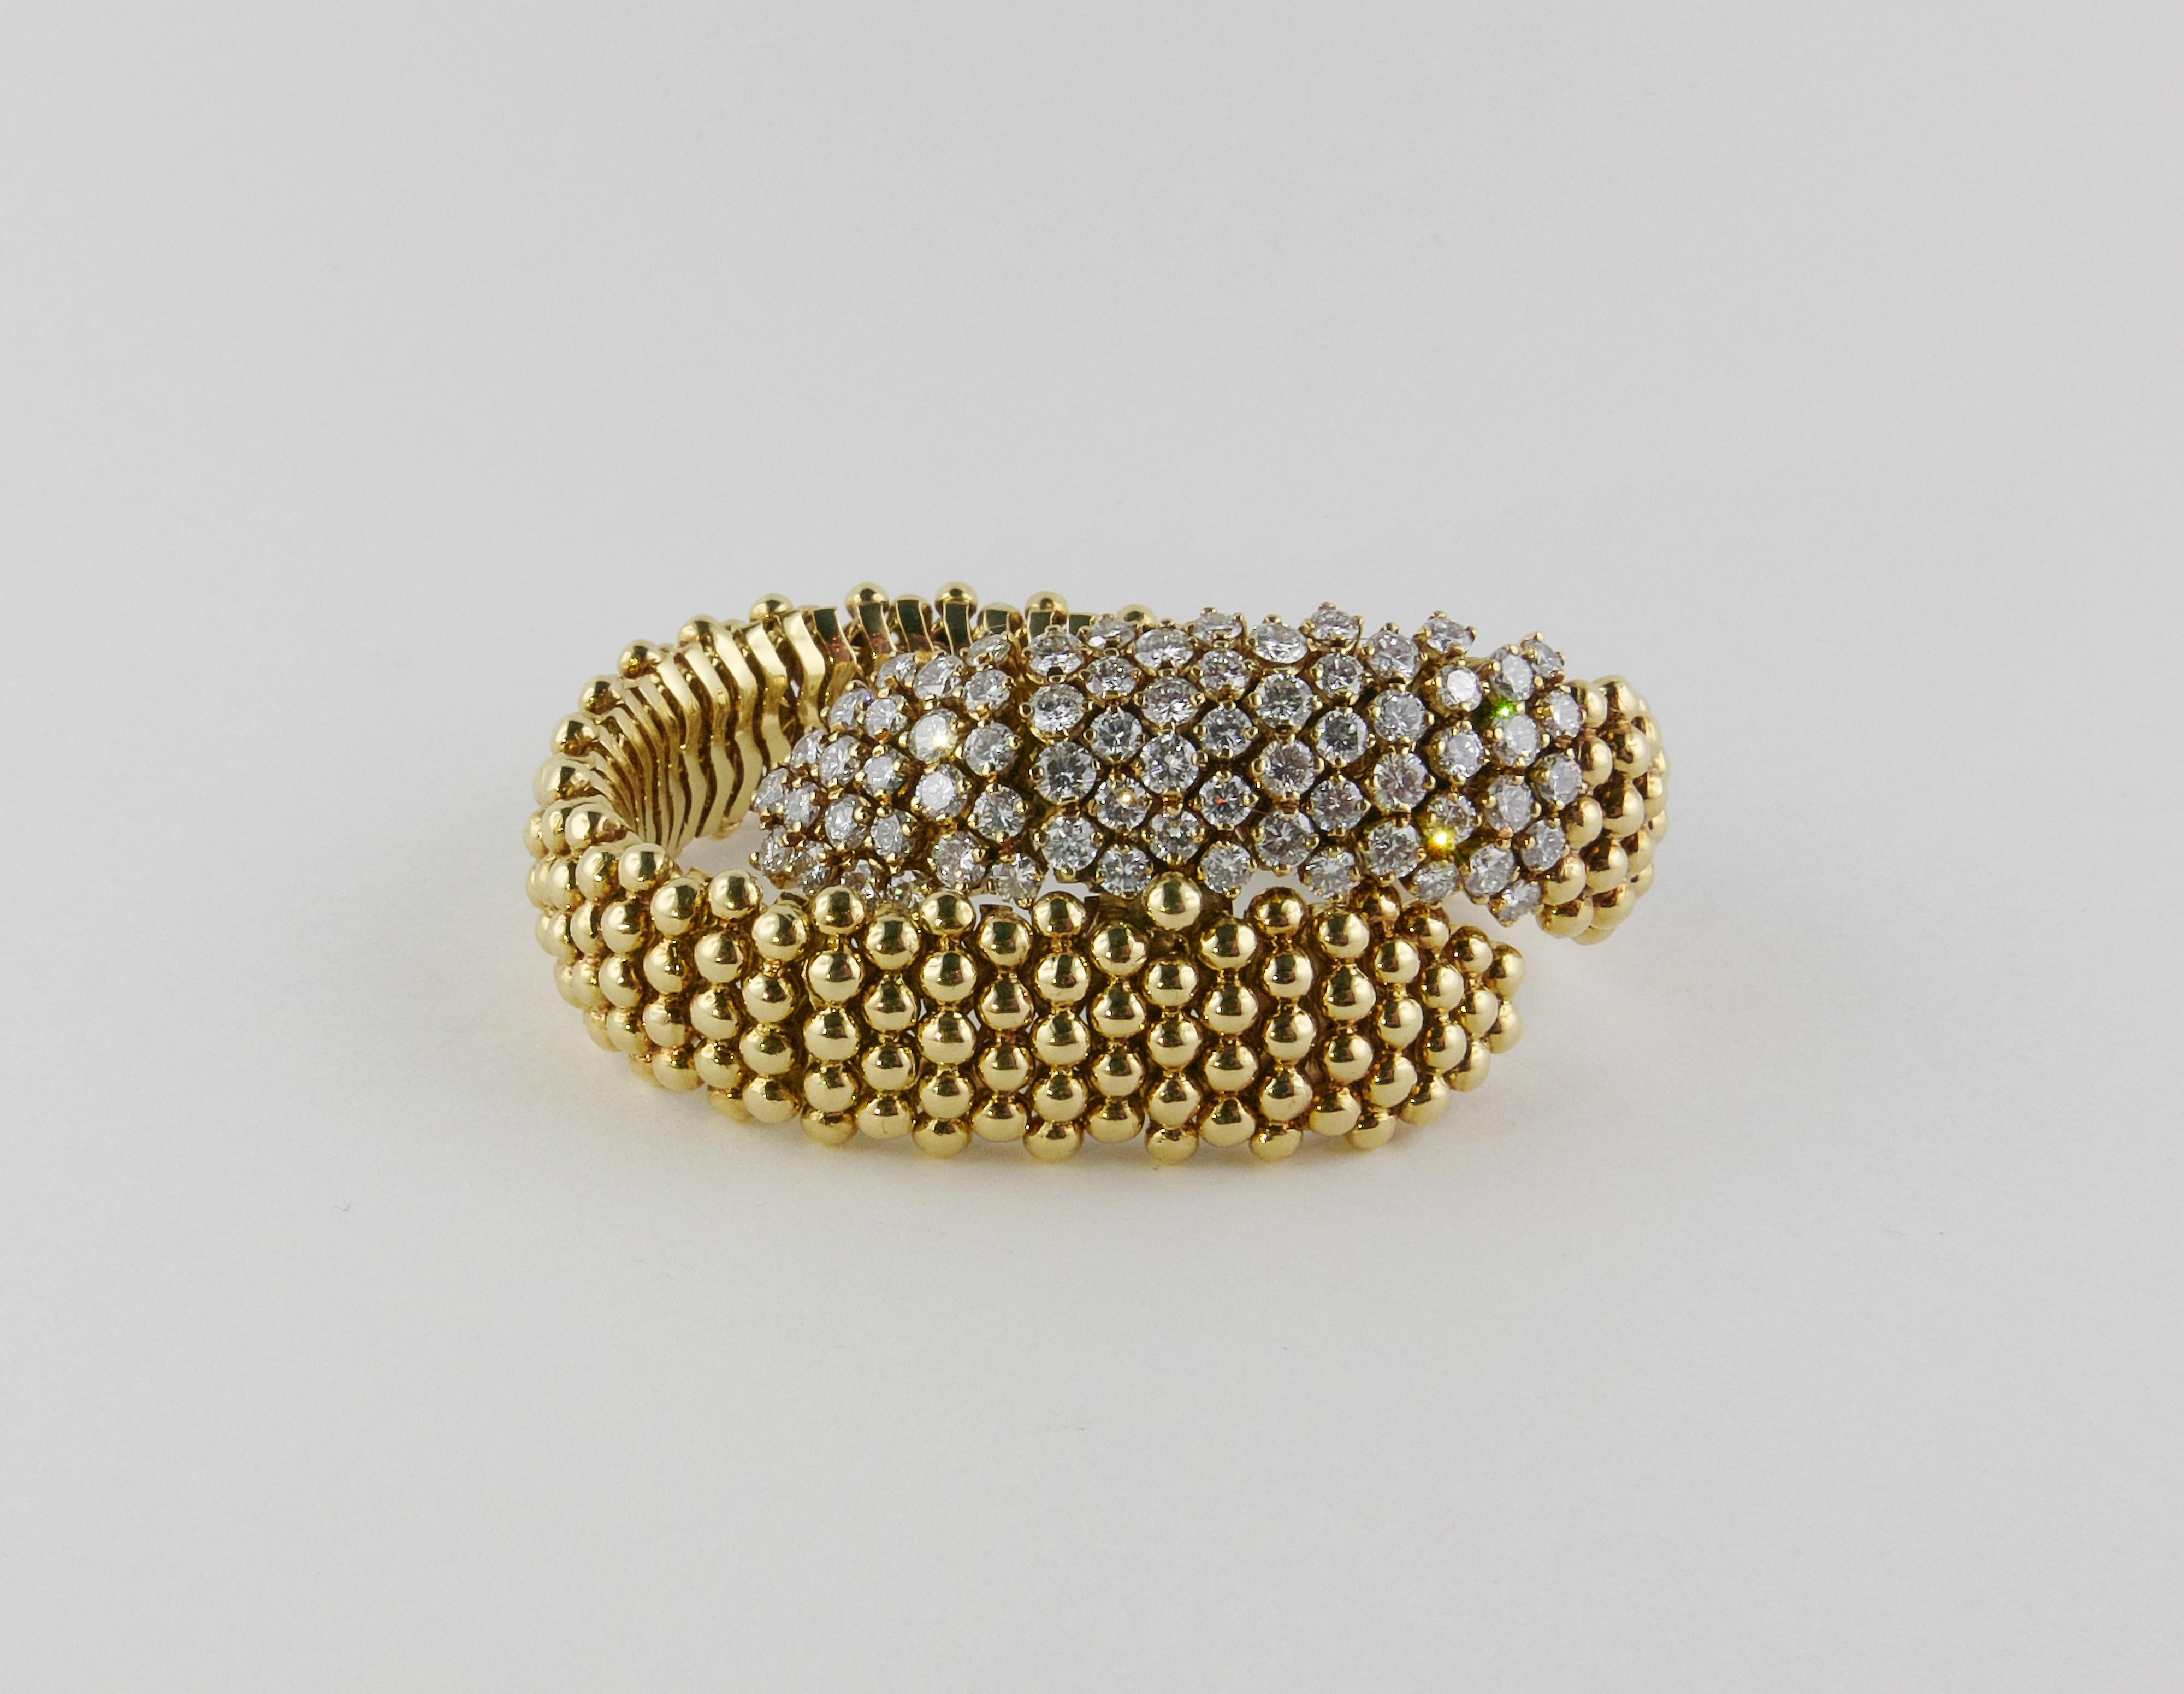 Elegant and striking Bracelet  composed of polished Gold spheres  creating a textured design that coils gracefully around the wrist.
This classy 1970s bypass flexible bracelet has a sinuous design and  great presence, it is crafted in 18k Yellow